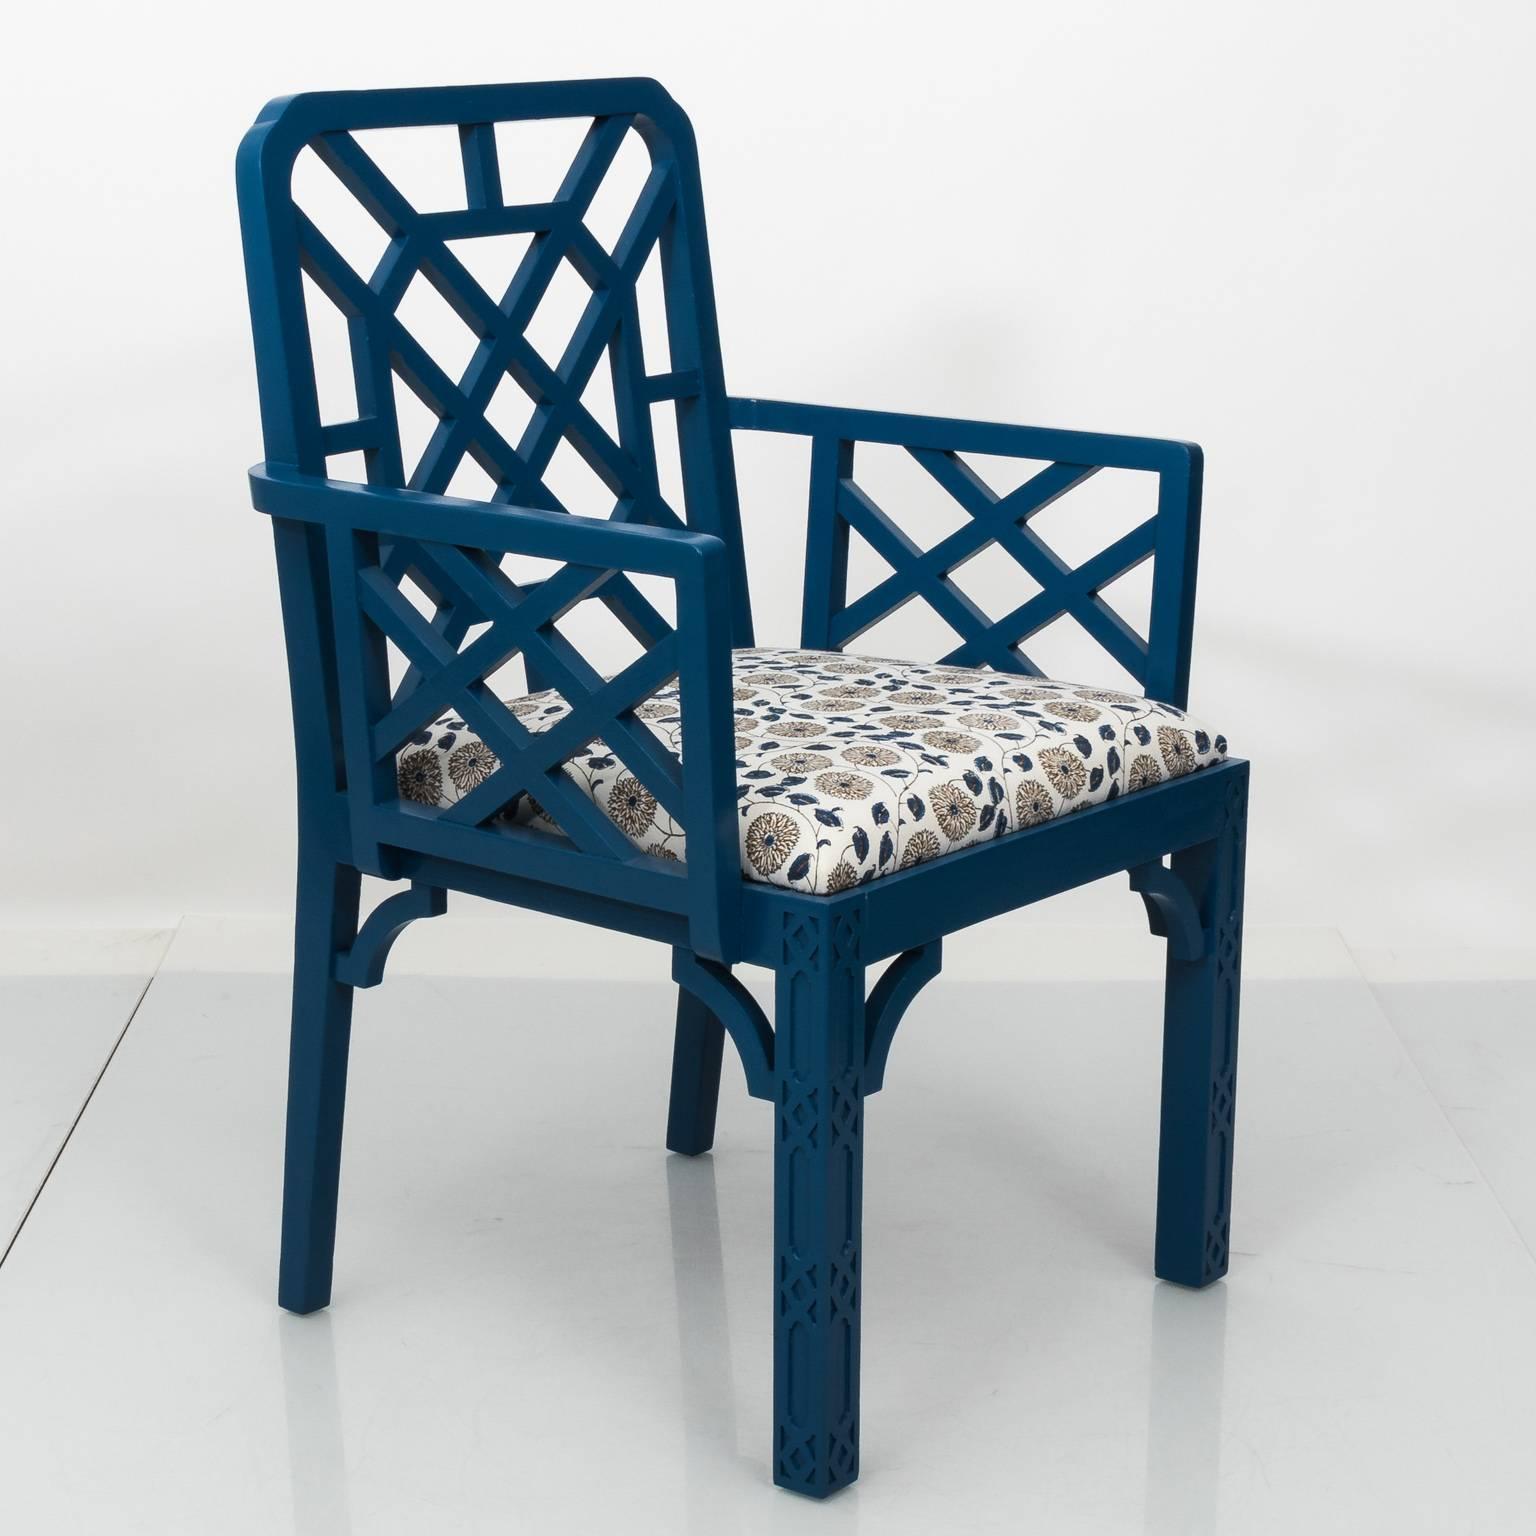 20th Century Pair of Blue Lacquered Open Arm Garden Chairs